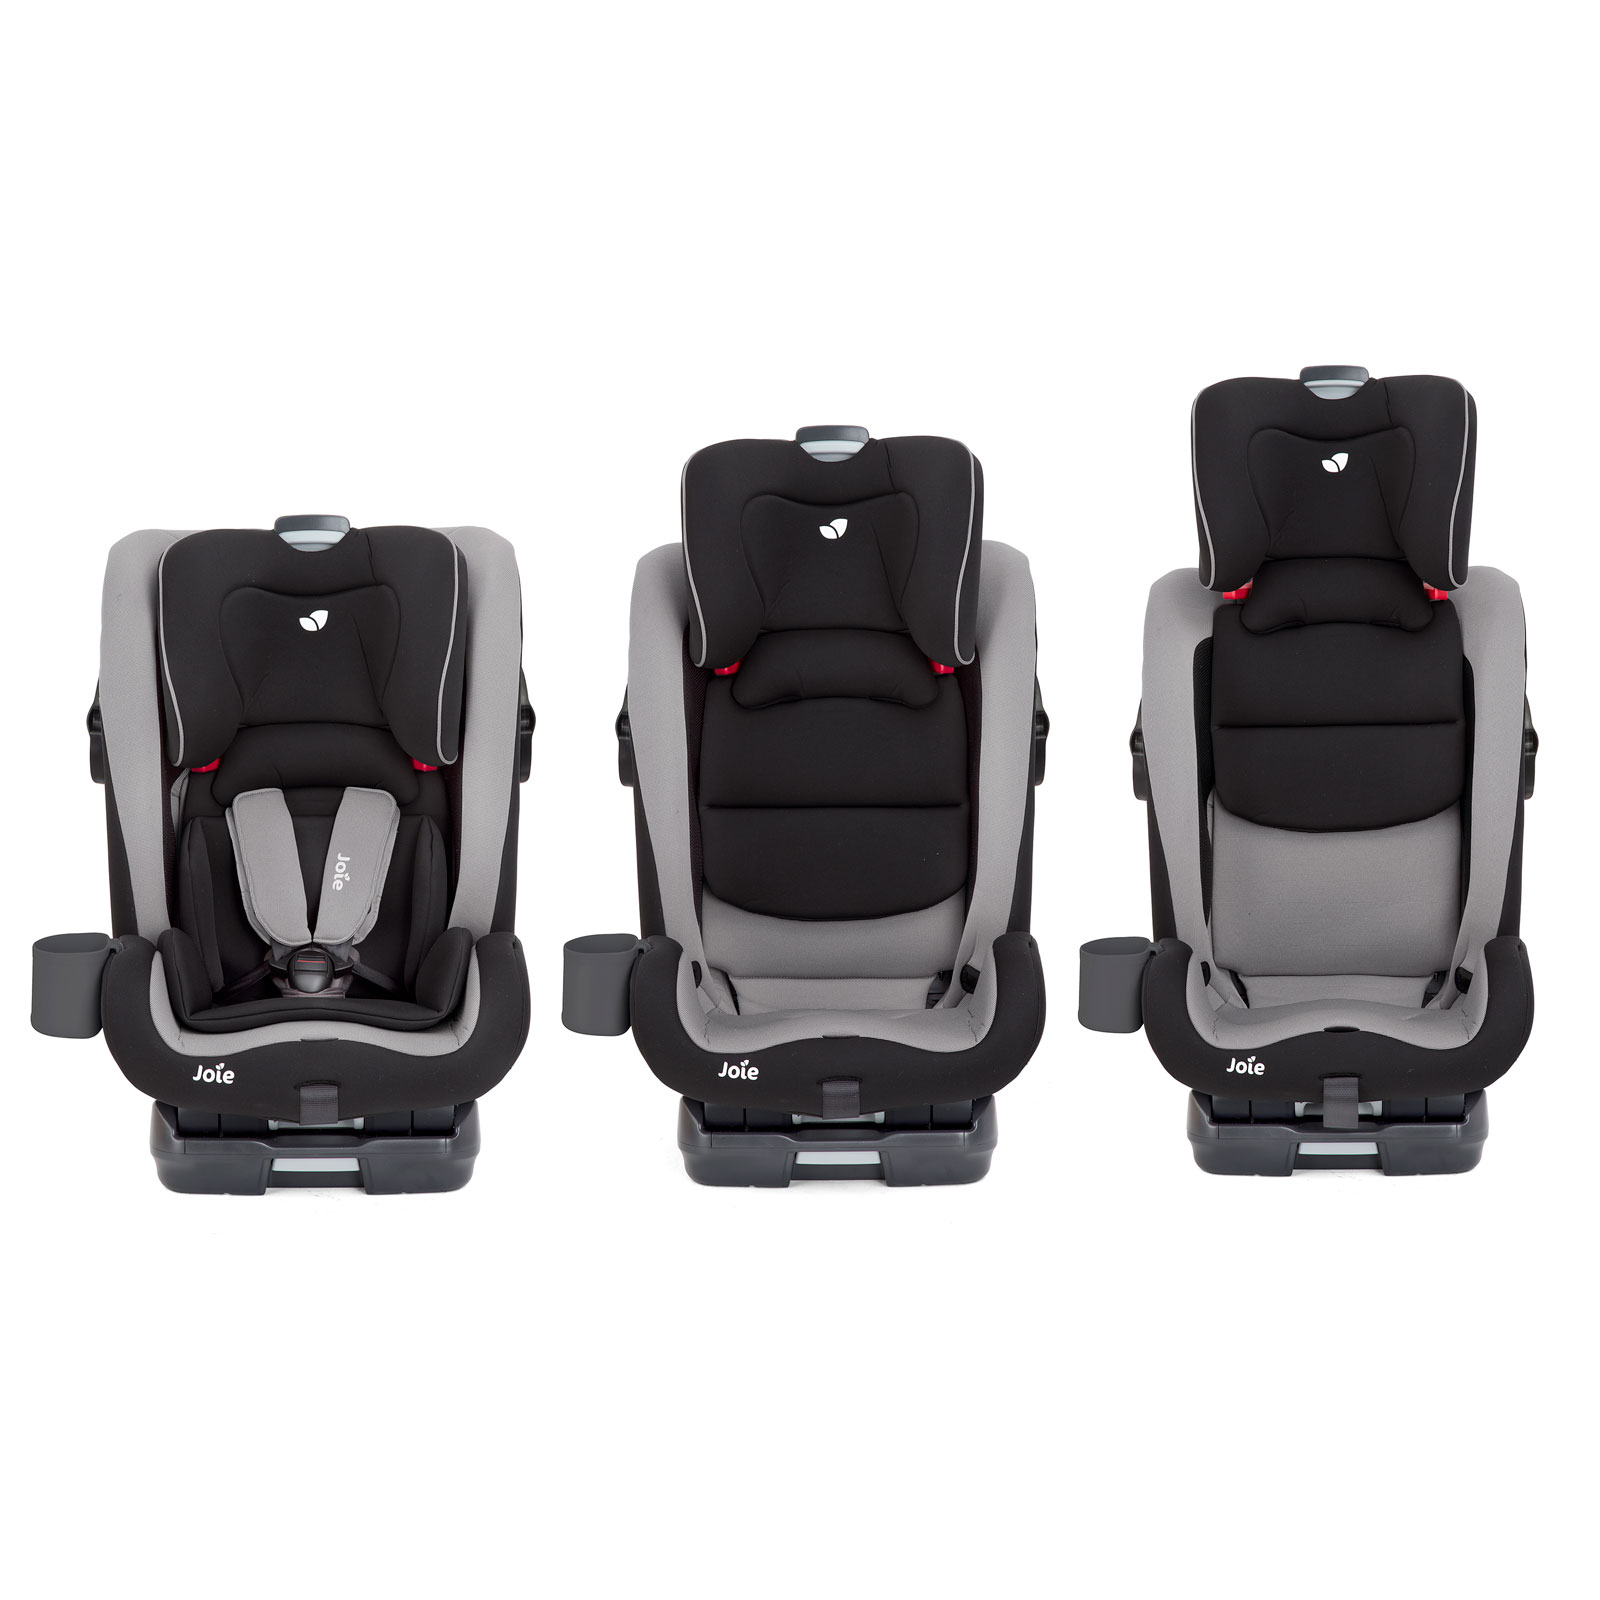 Joie Bold Group 1/2/3 ISOFIX Car Seat  - Slate (9 Months-12 Years)